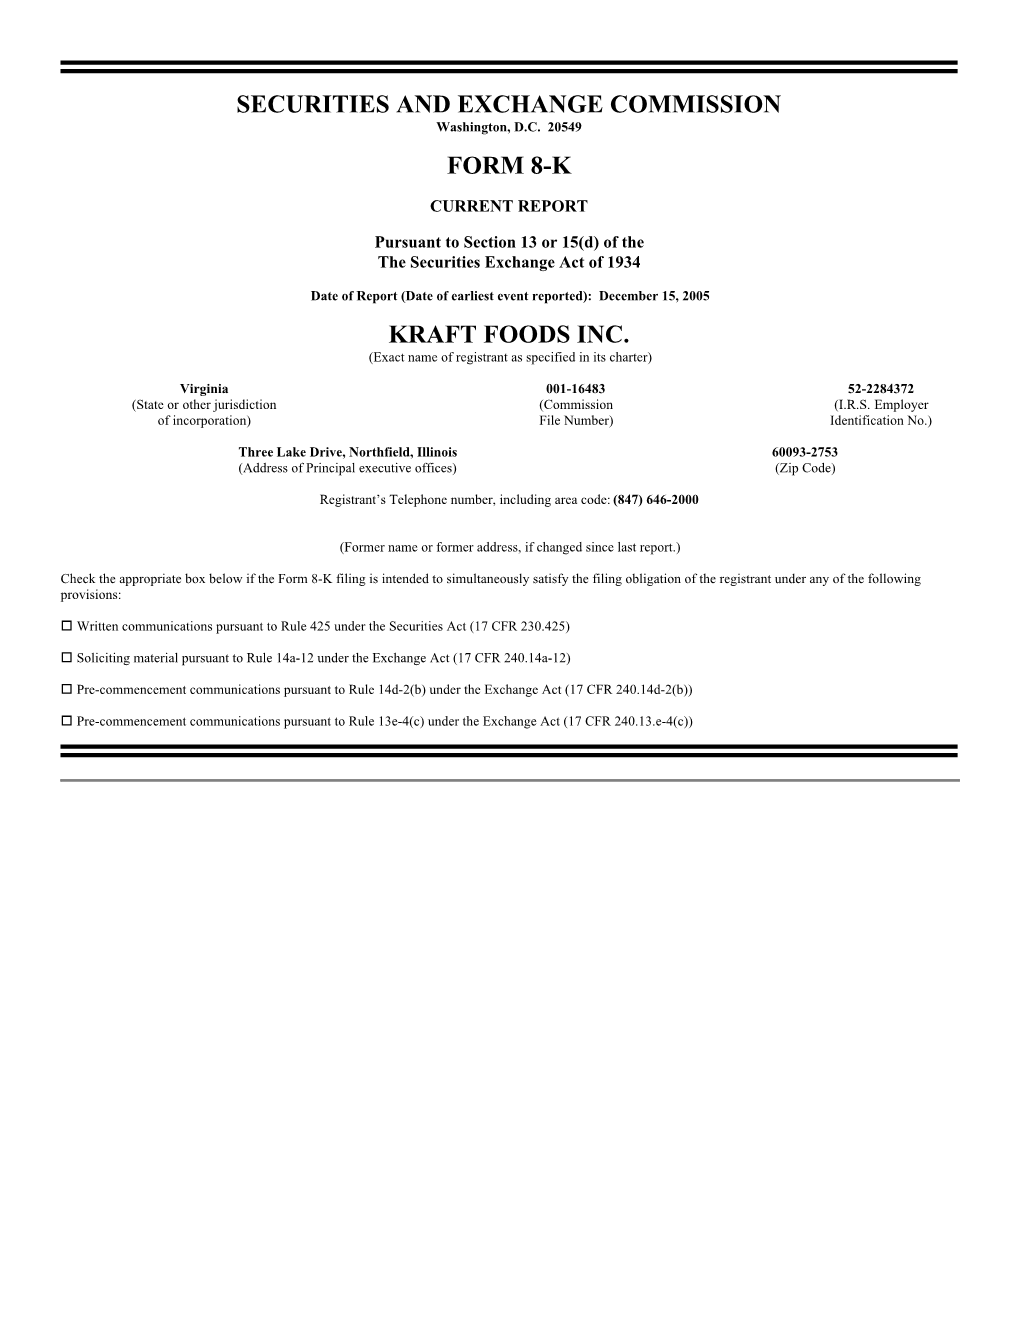 Securities and Exchange Commission Form 8-K Kraft